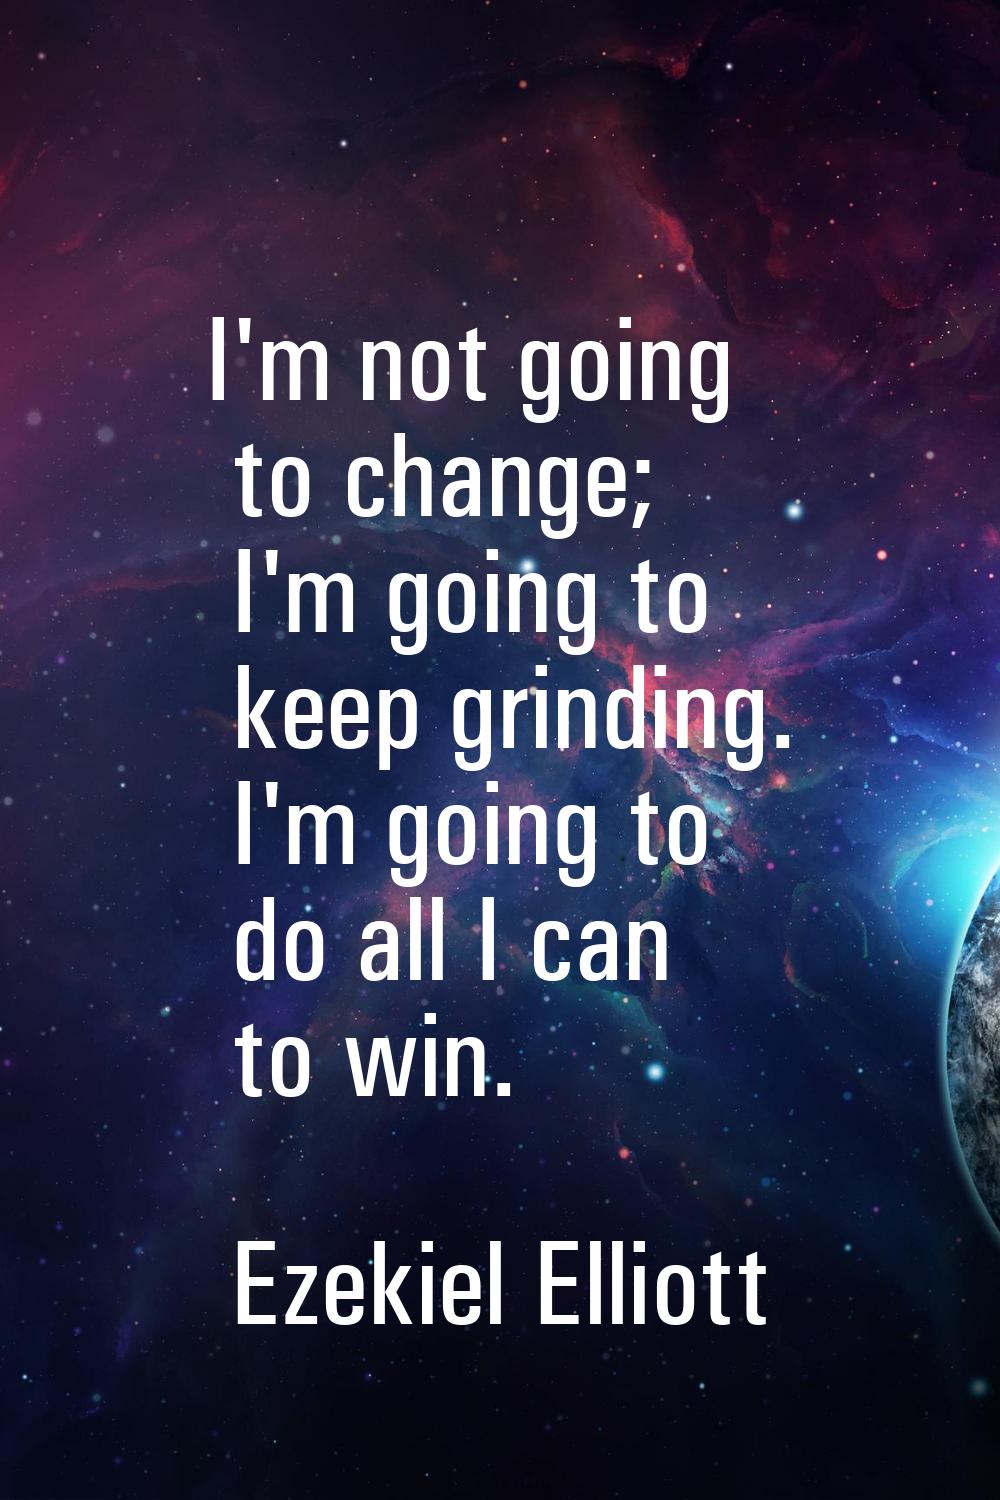 I'm not going to change; I'm going to keep grinding. I'm going to do all I can to win.